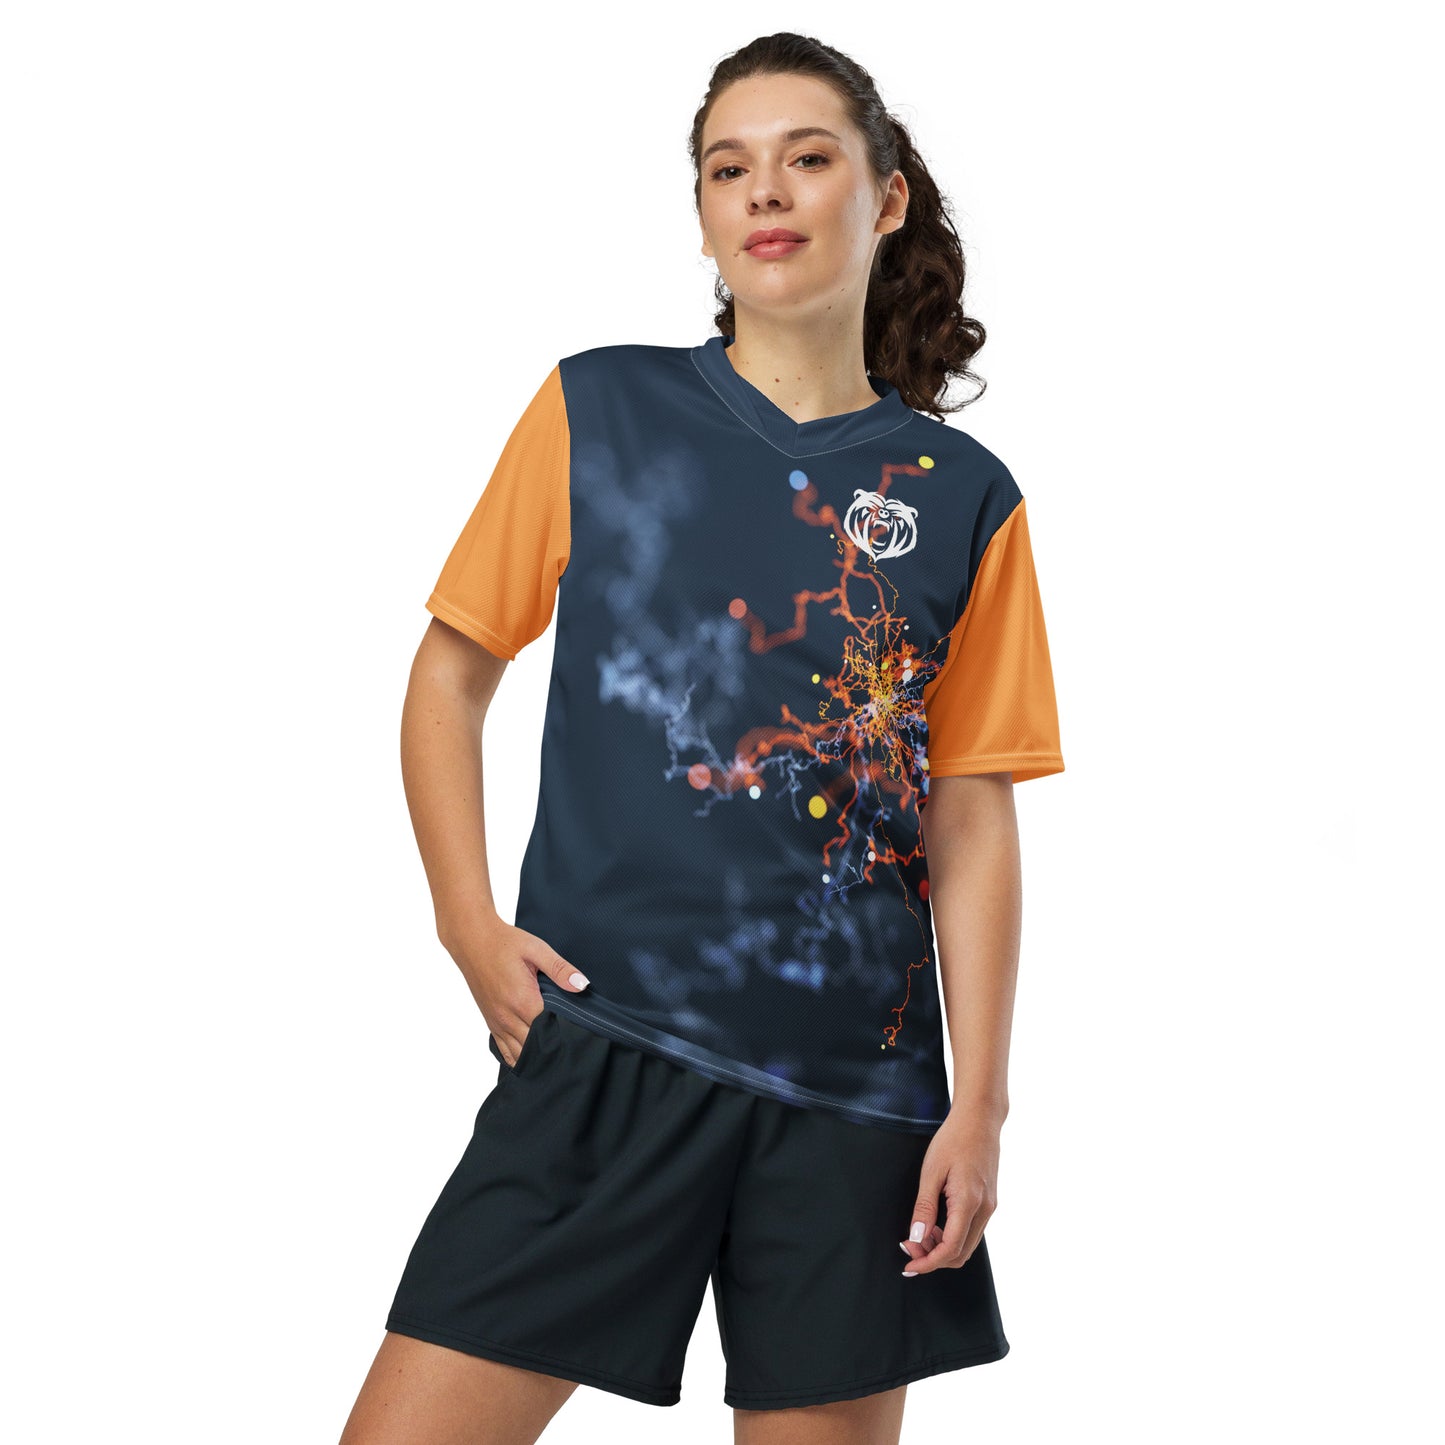 Recycled Unisex Jersey - Spark